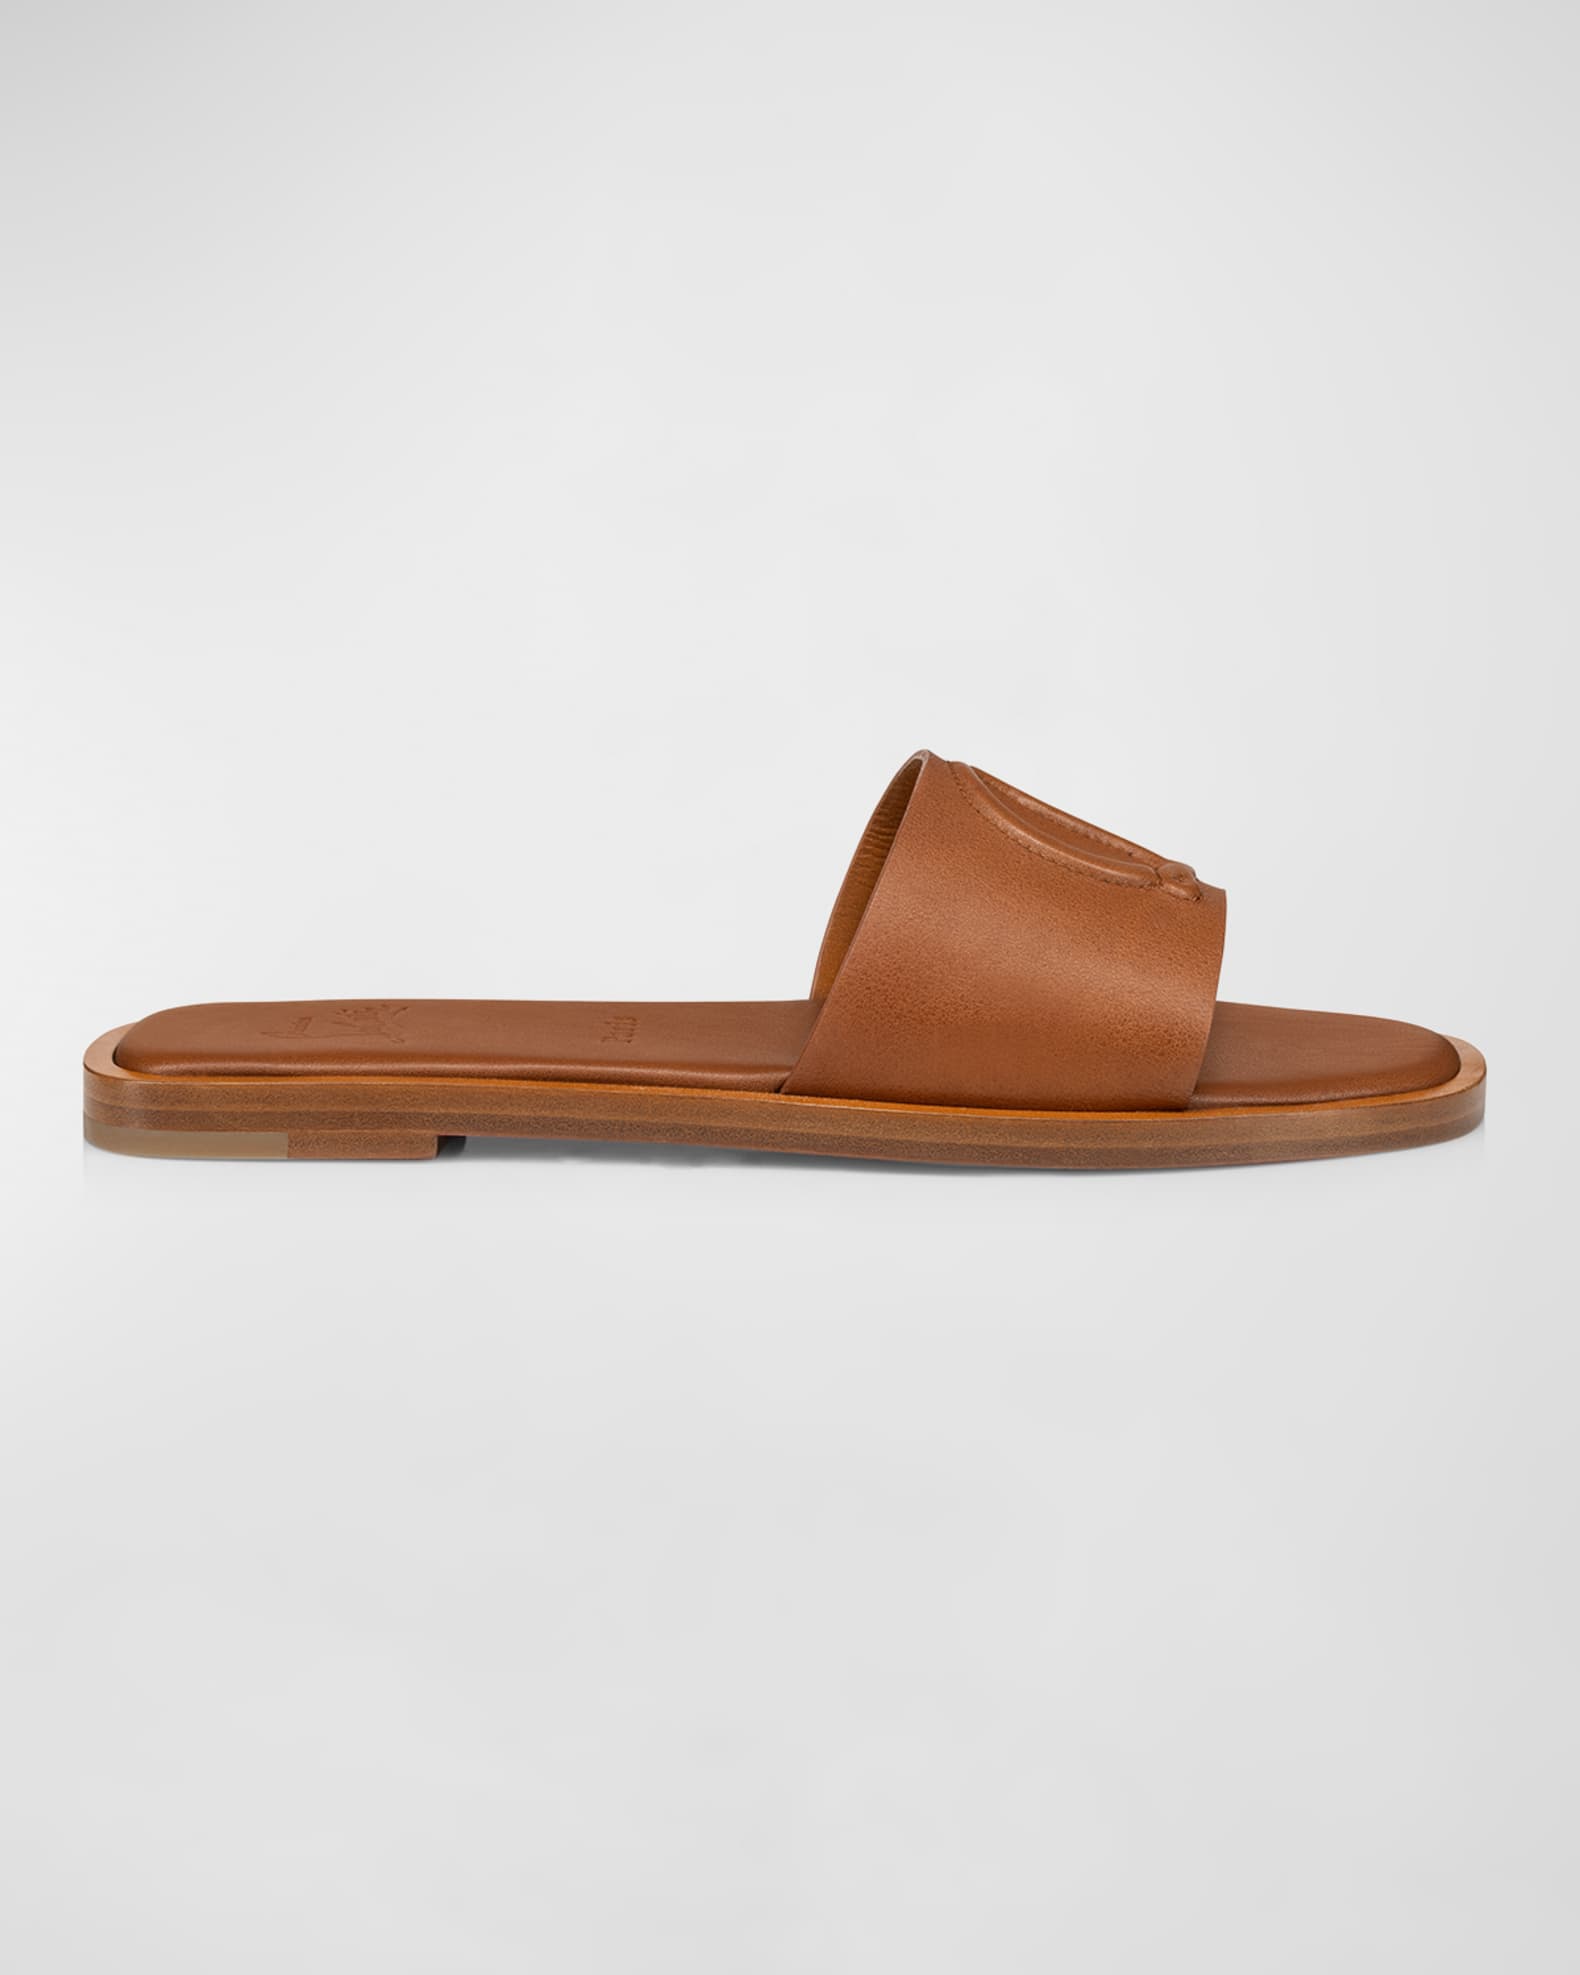 Christian Louboutin Leather Logo Red Sole Slide Sandals | Neiman Marcus